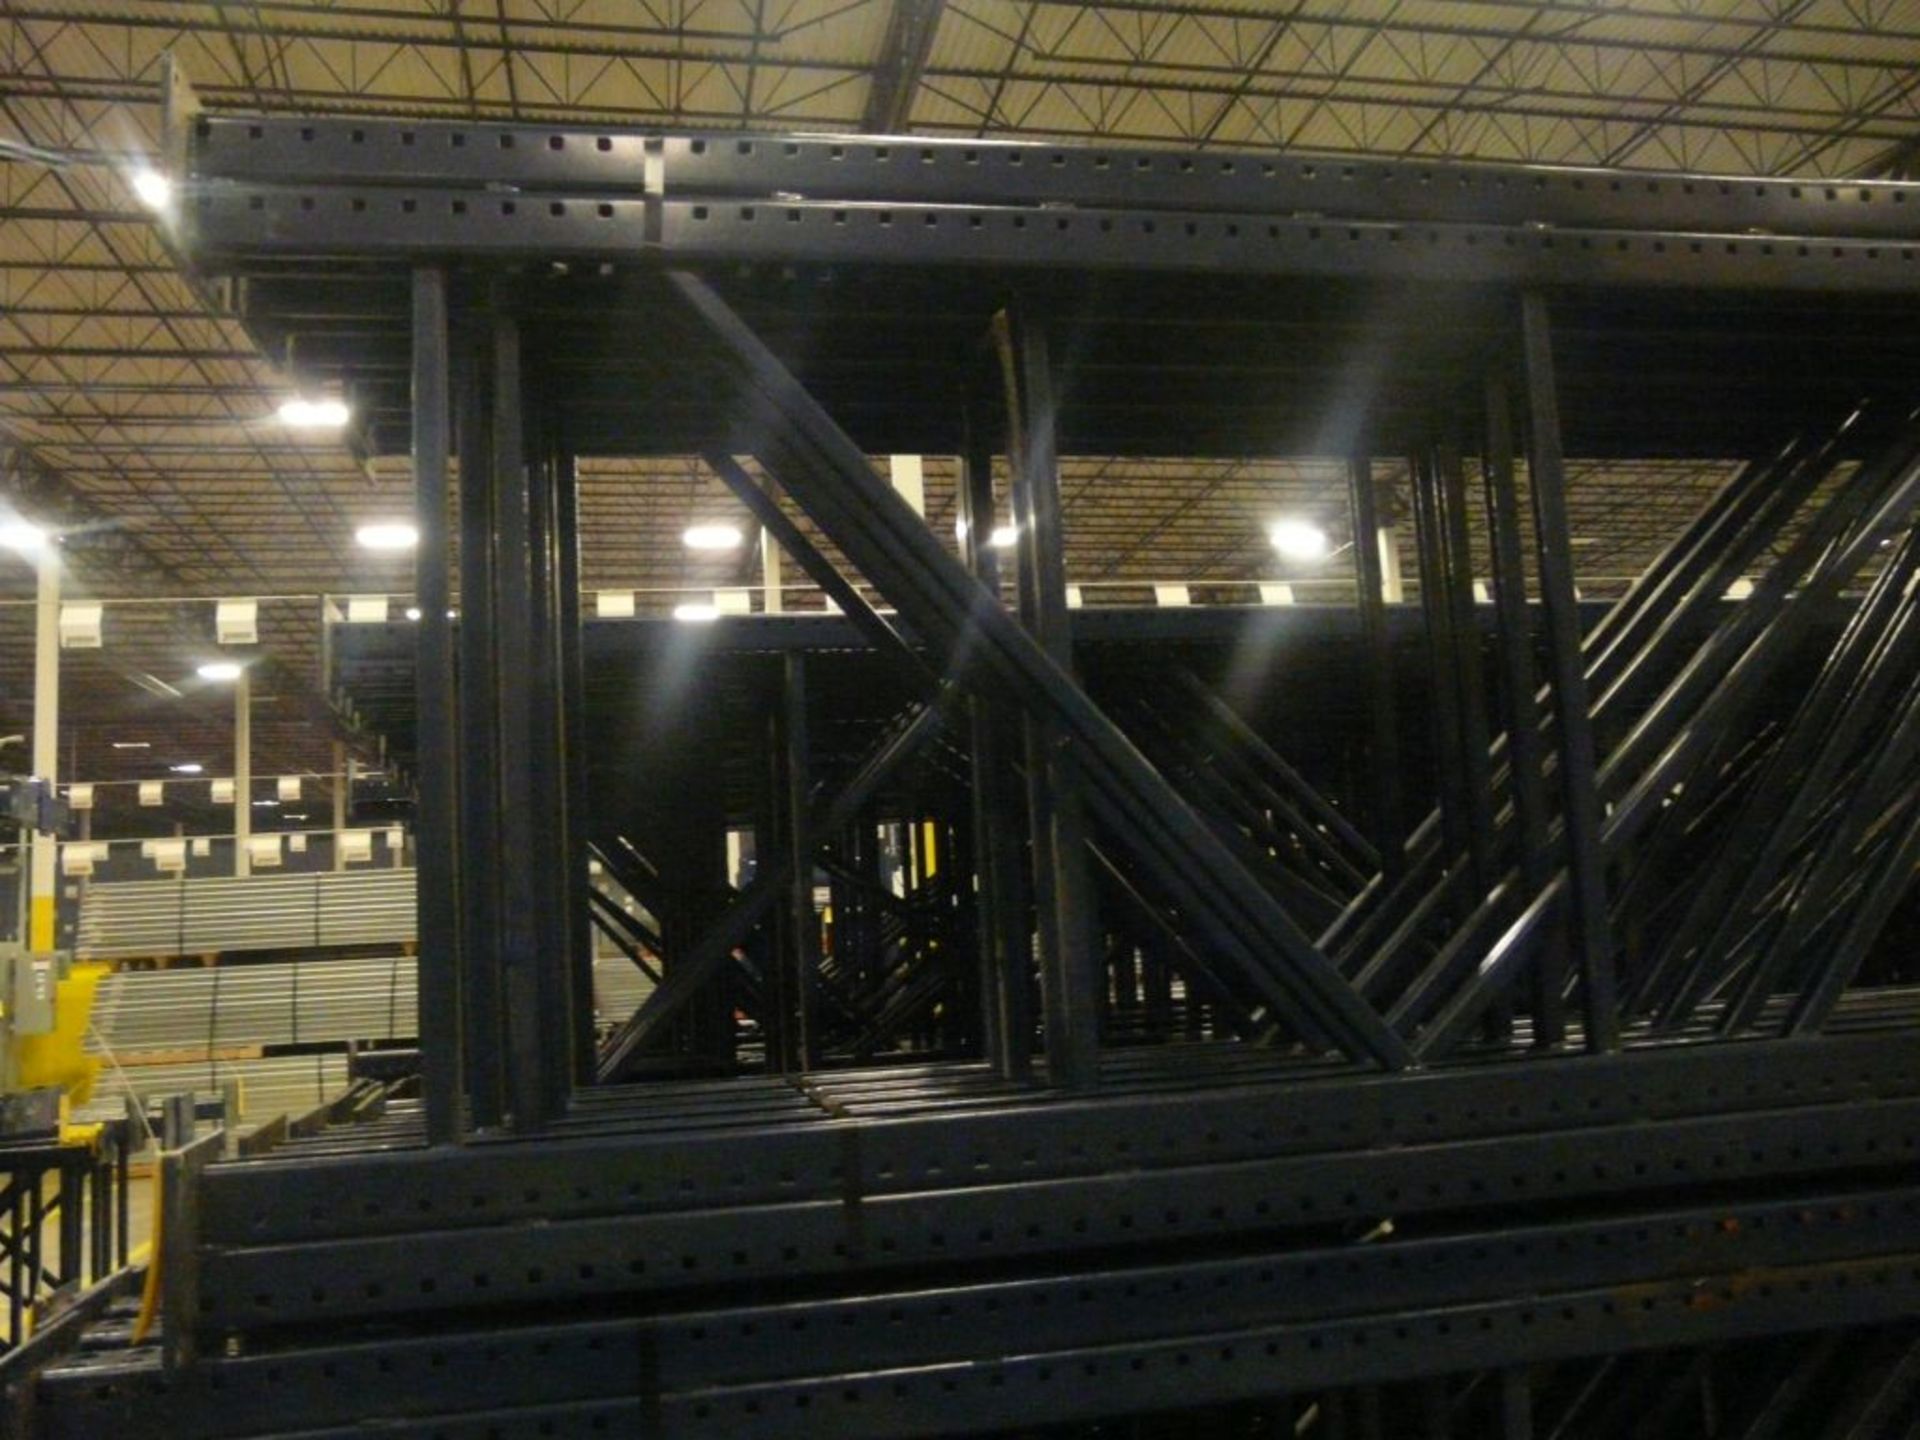 Lot of (10) 29'H x 42"W Double Column Uprights with 11' Second Column - Tag: 224093 - $30 Lot - Image 2 of 3